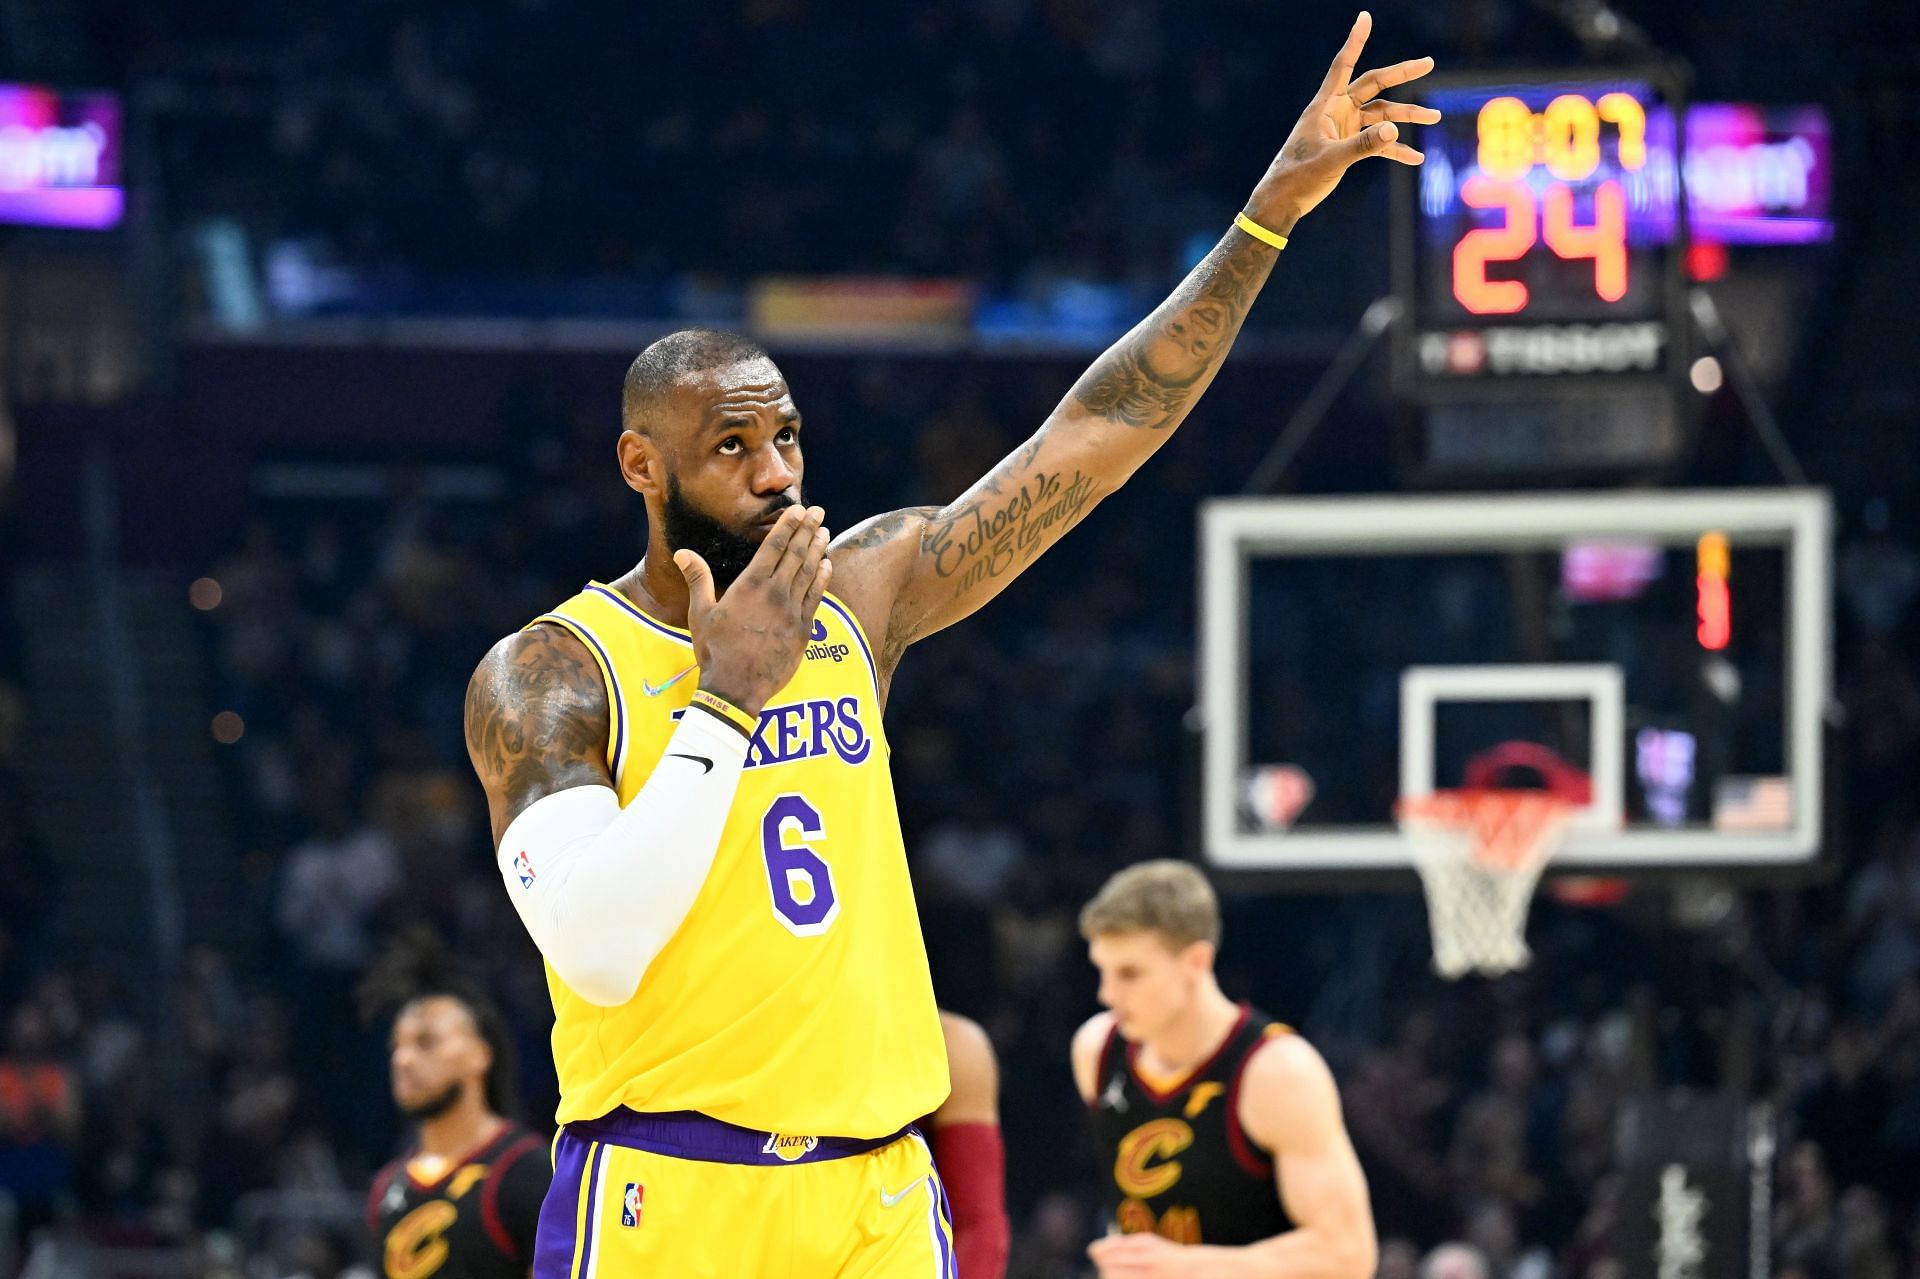 LeBron James of the LA Lakers waves to the crowd against the Cleveland Cavaliers on March 21 in Cleveland, Ohio.